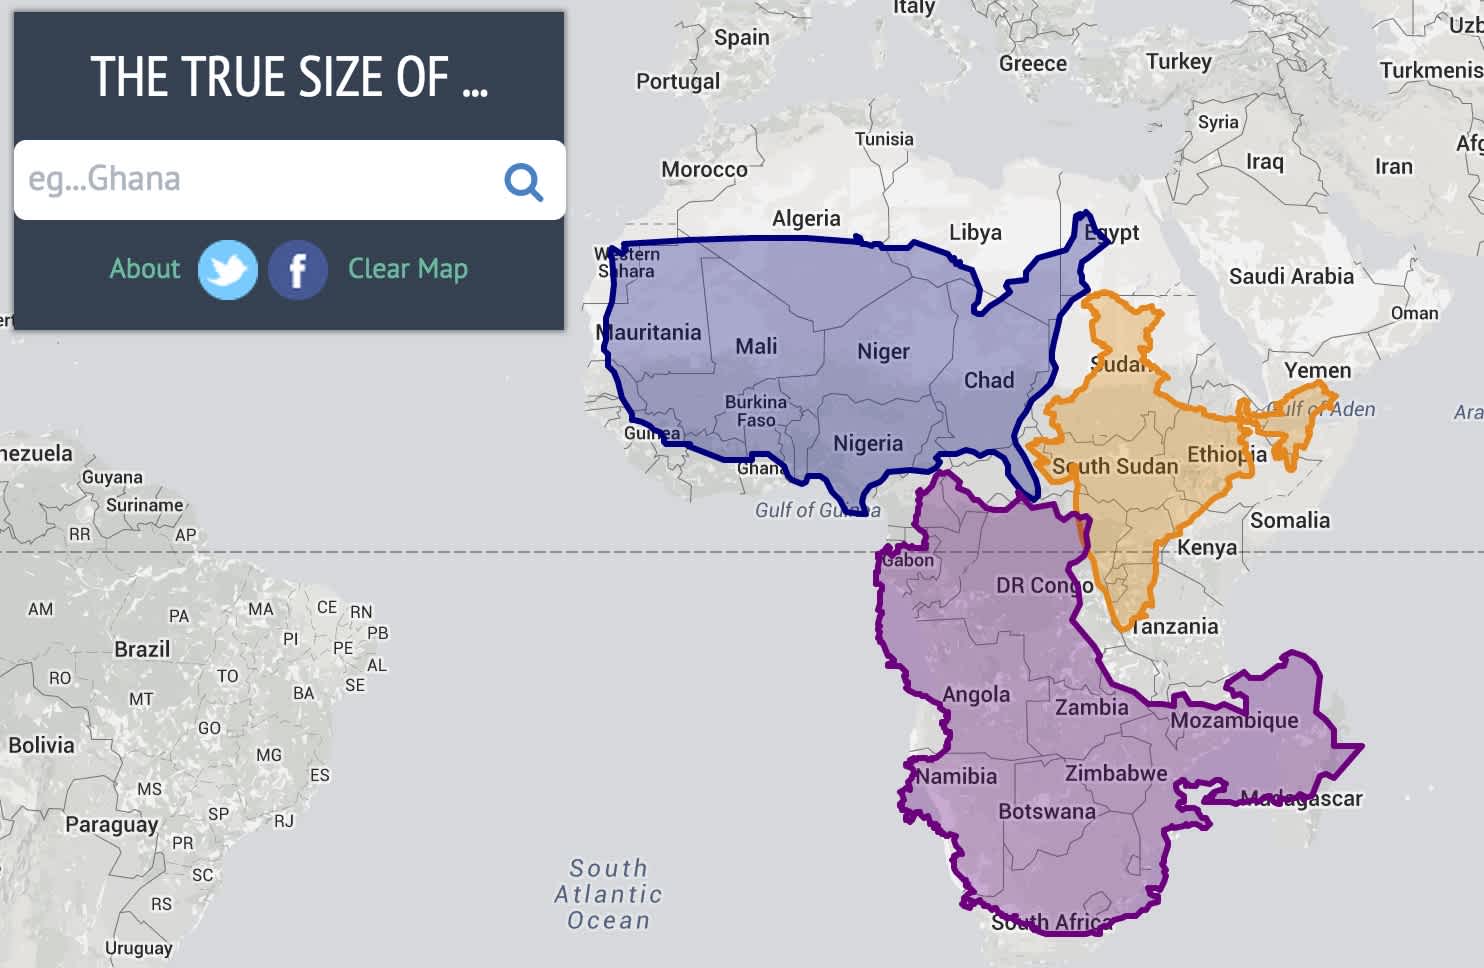 The True Size Of